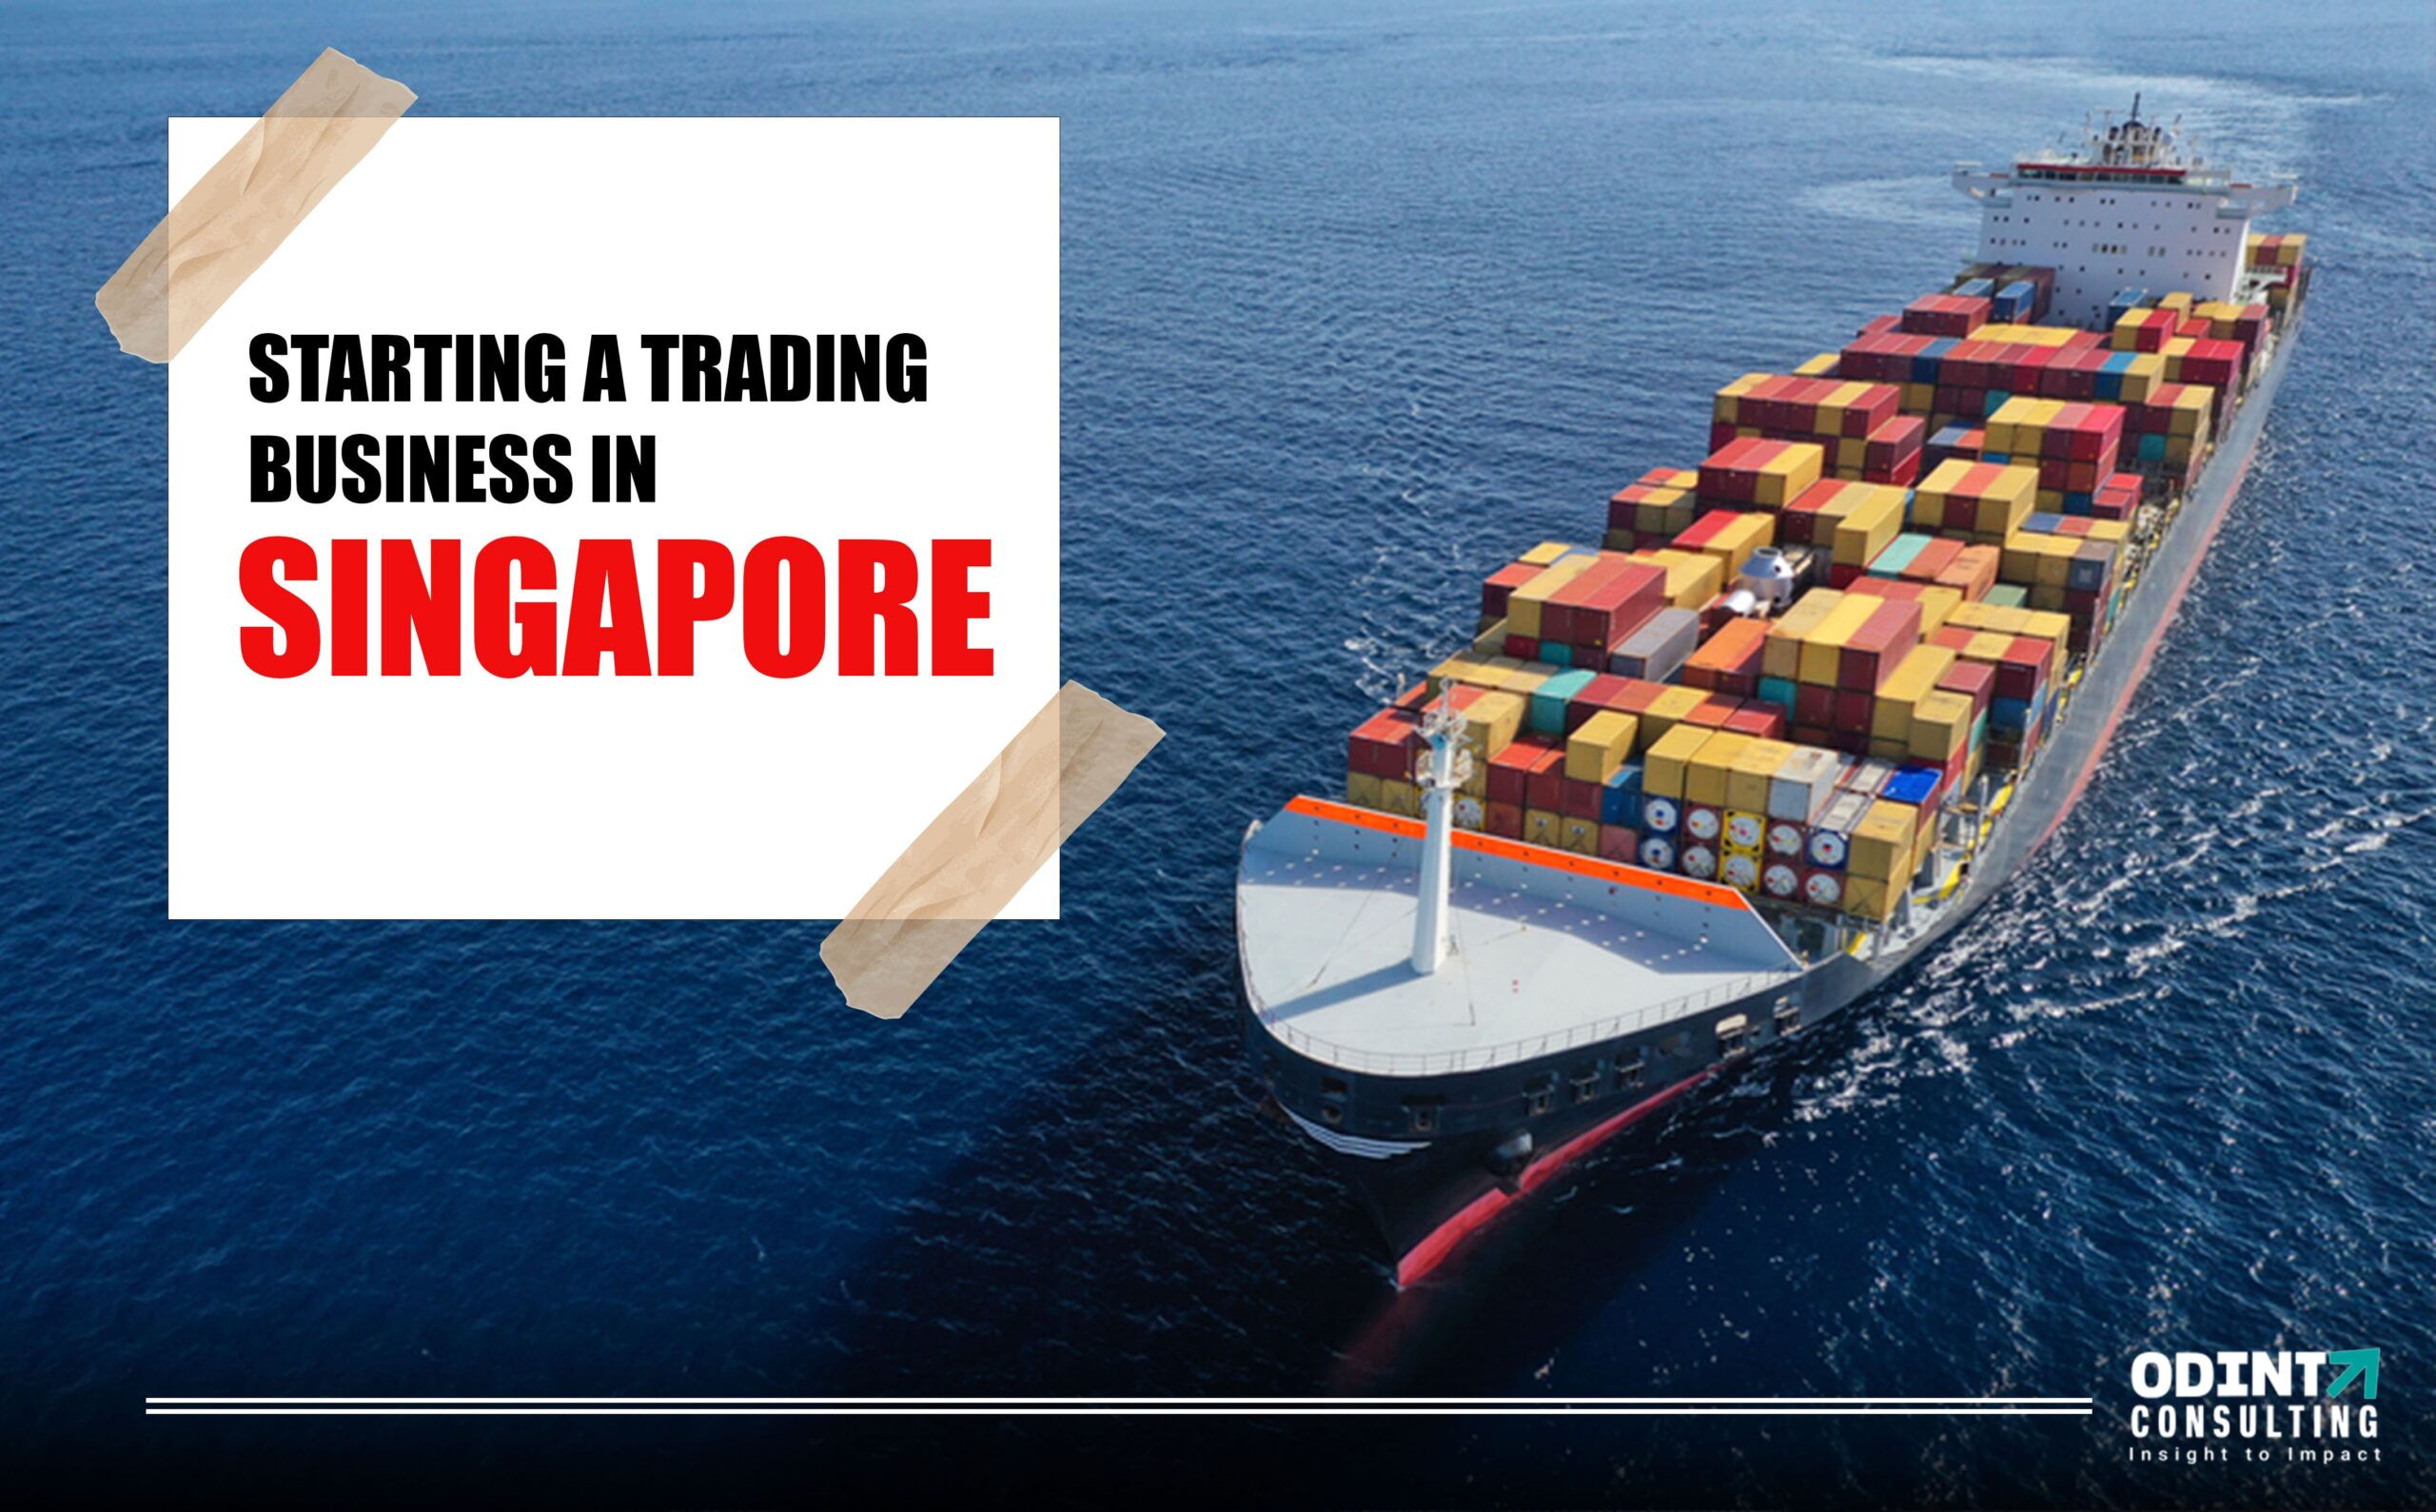 Starting a Trading Business in Singapore: 6 Tips From Our Experts